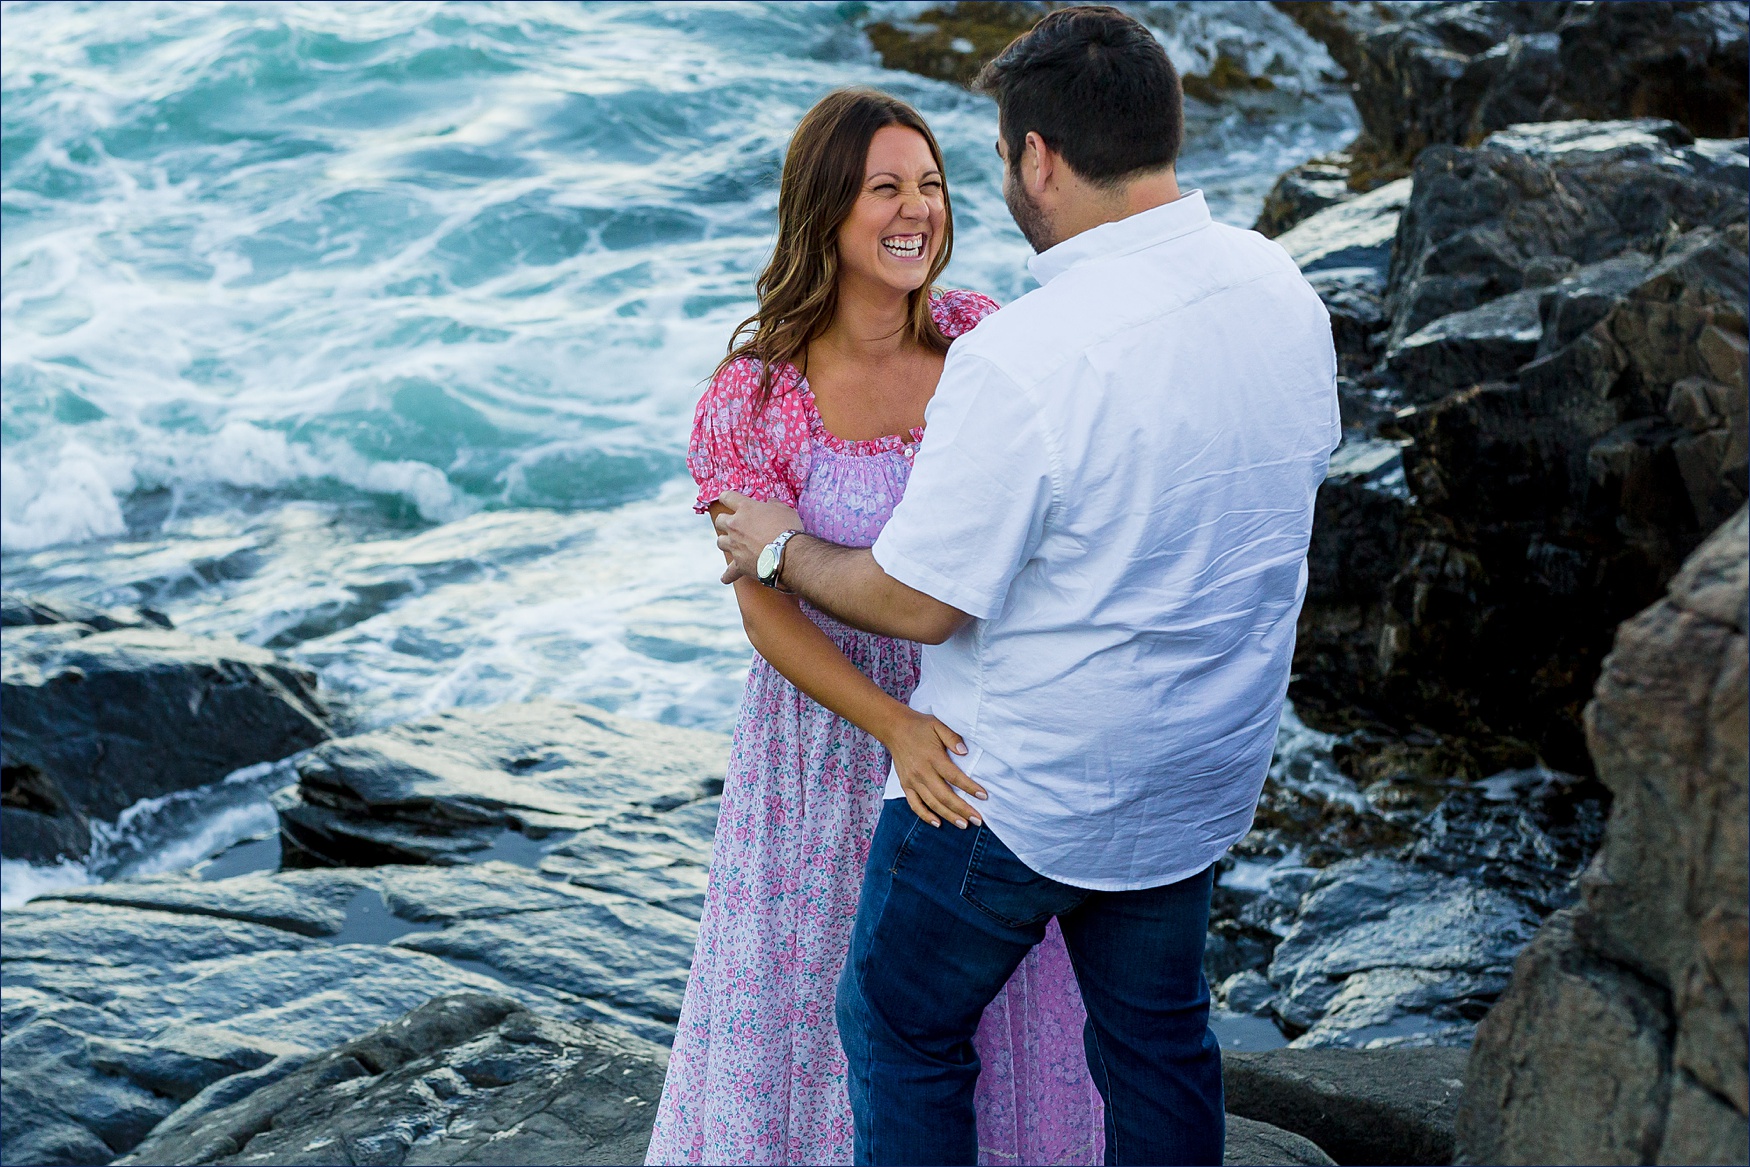 The couple laughs together out on Bald Head Cliff in Ogunquit Maine